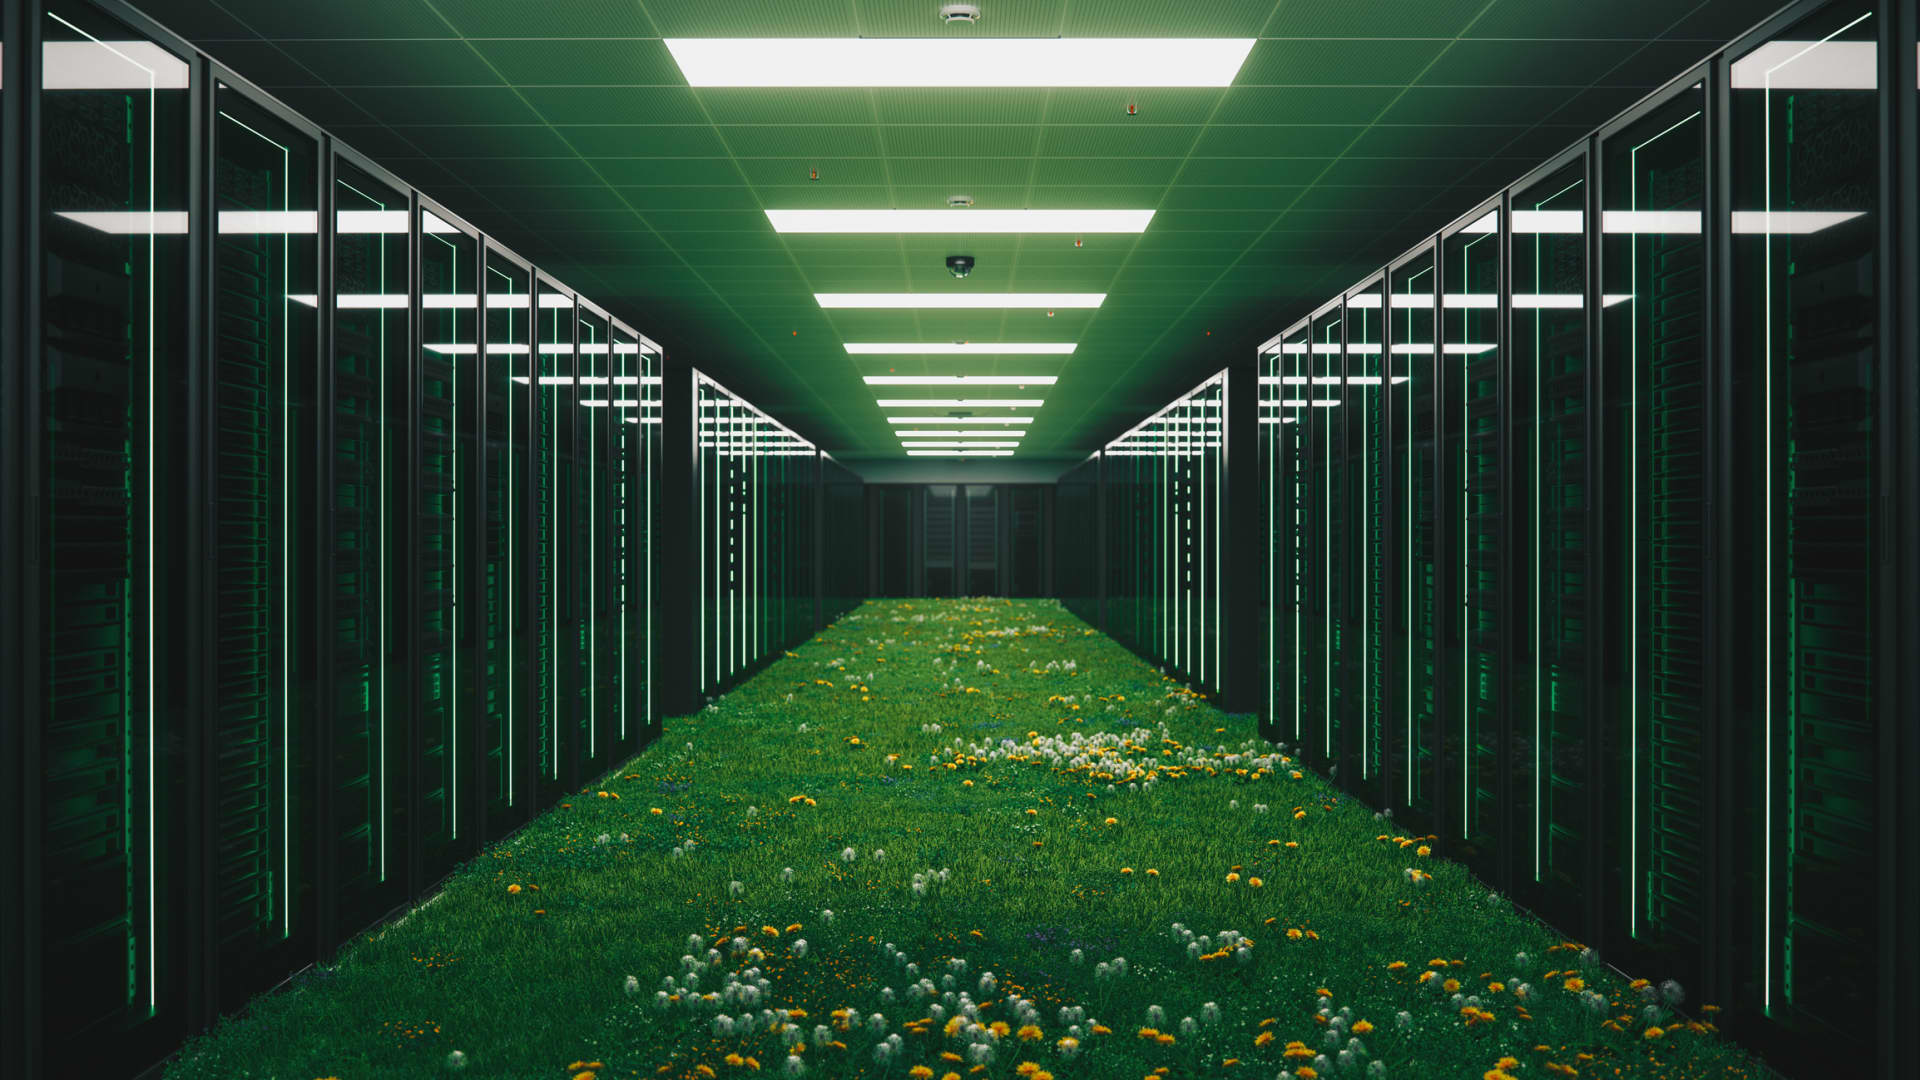 Eco-friendly data centers help drive .3 billion of green investment in Southeast Asia, but report shows more needed